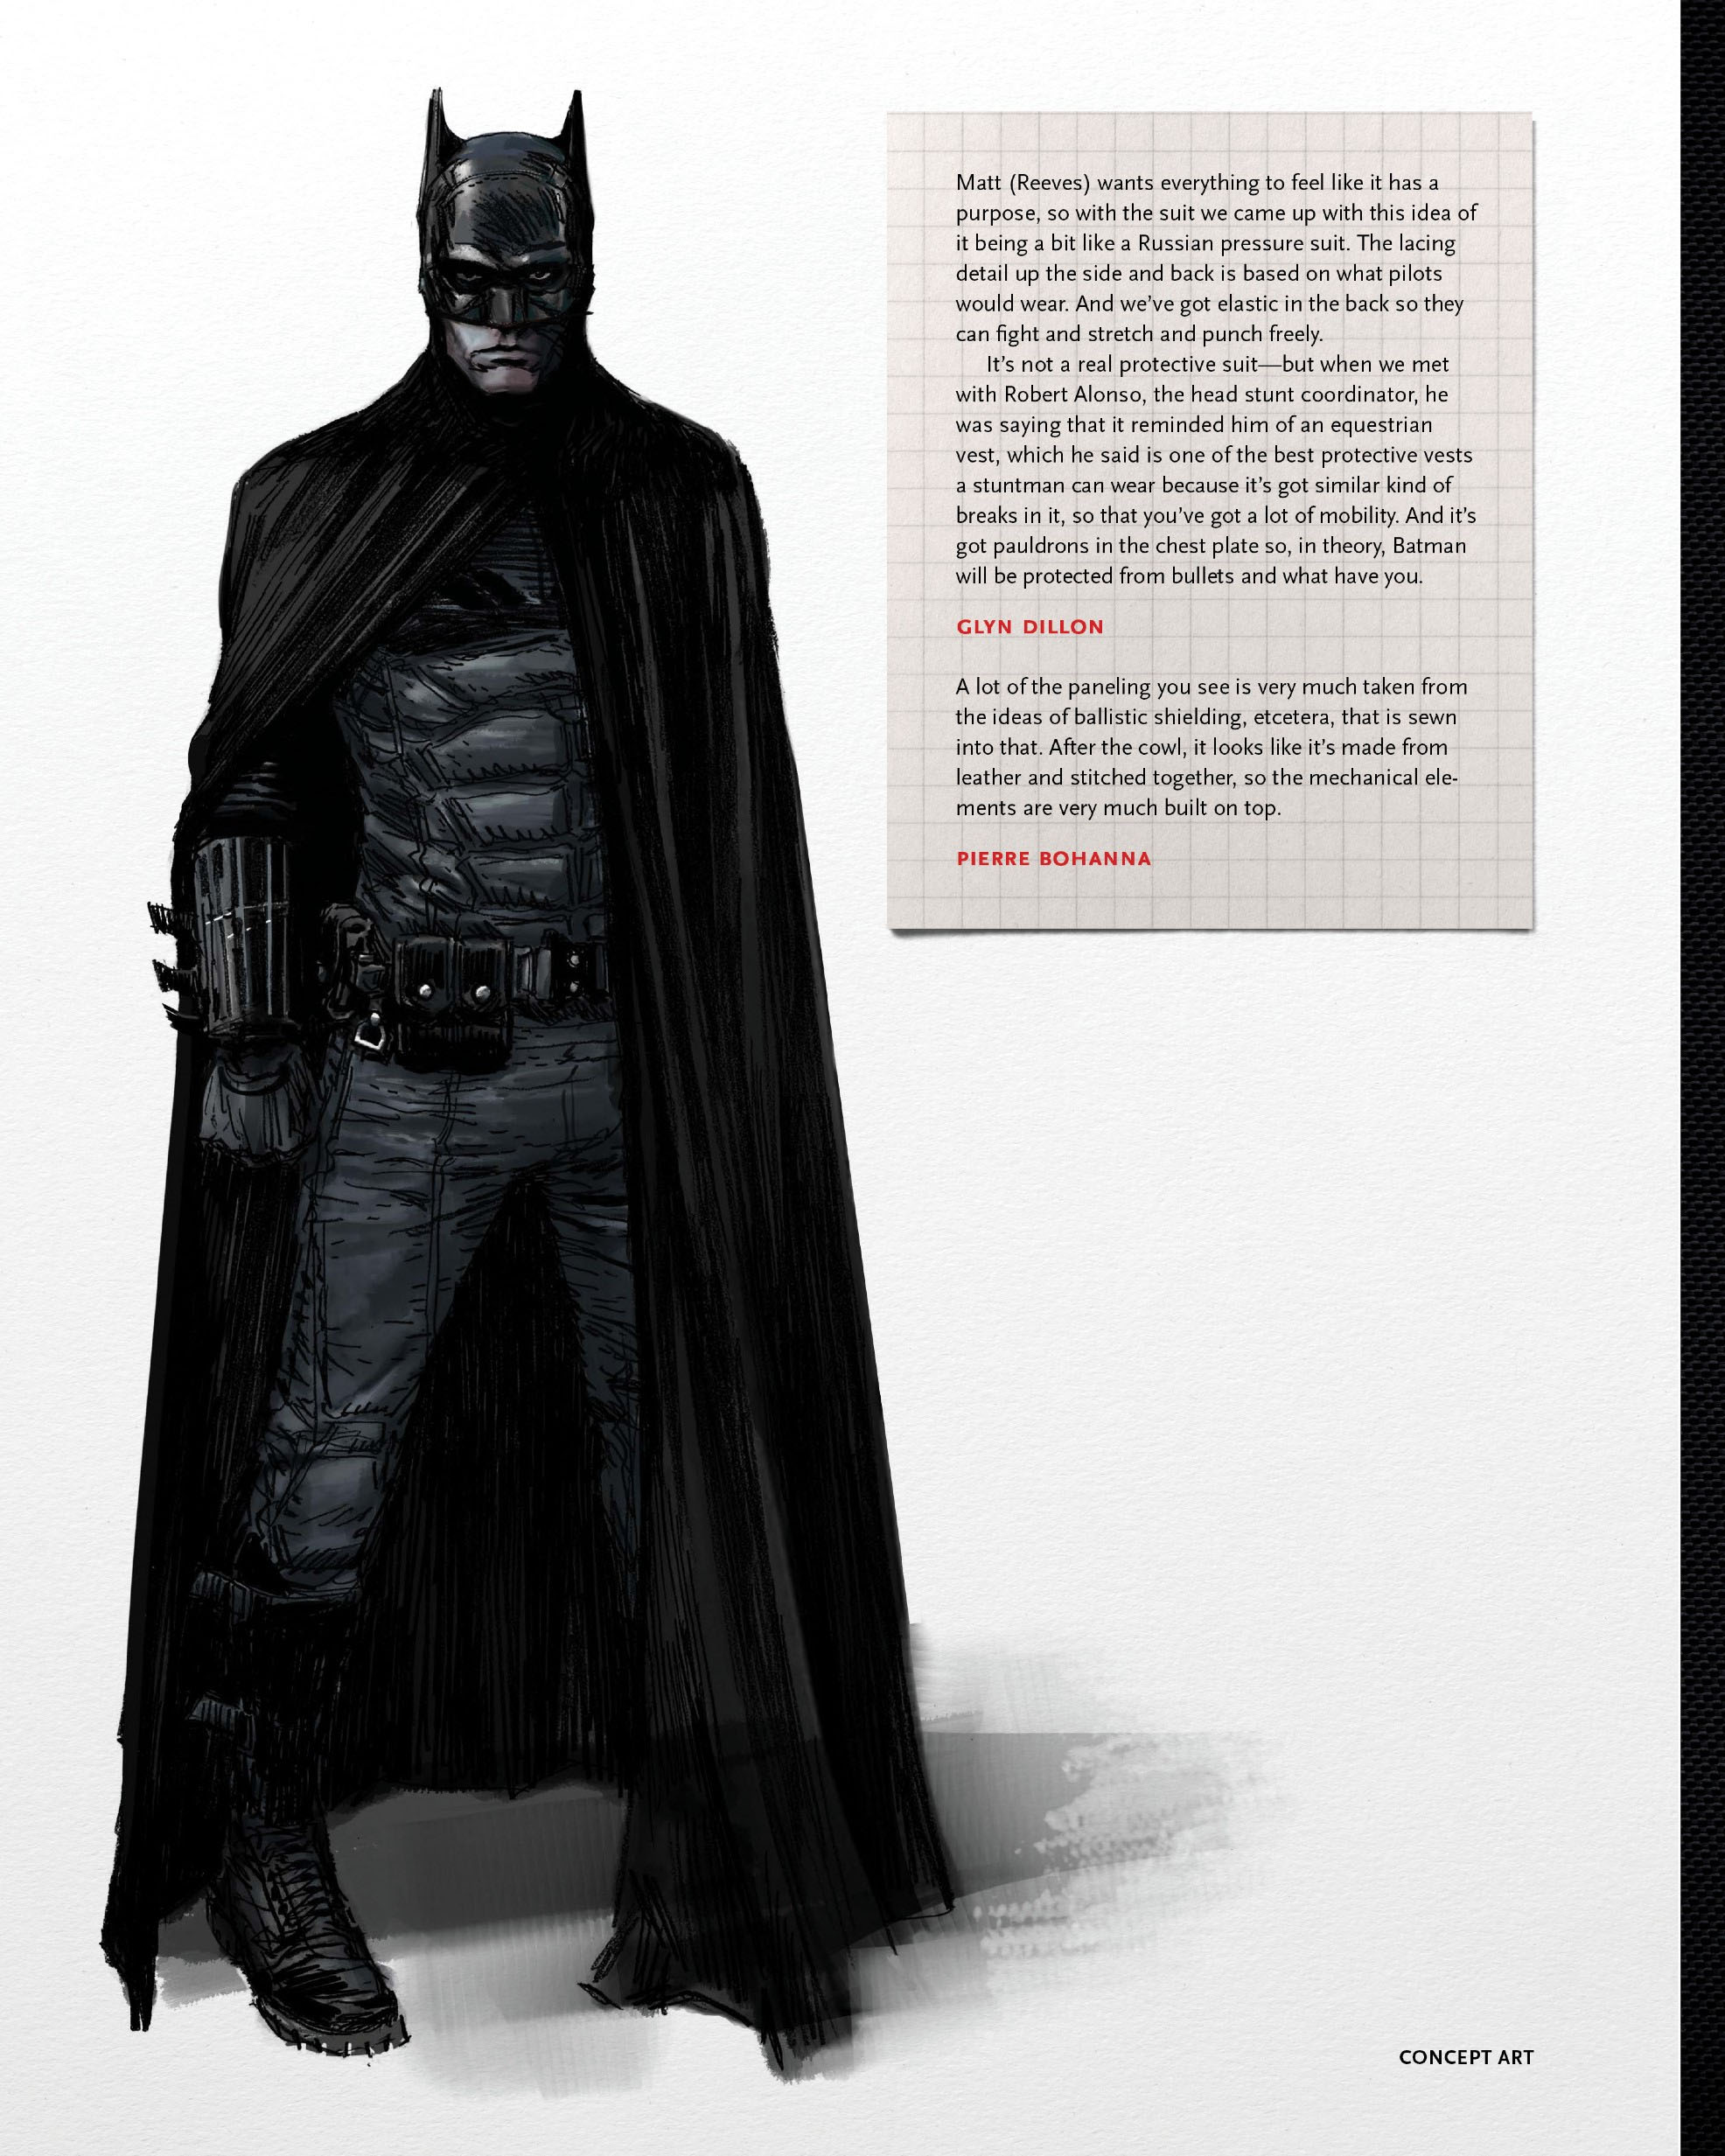 DC Shares New Previews From The Art of The Batman